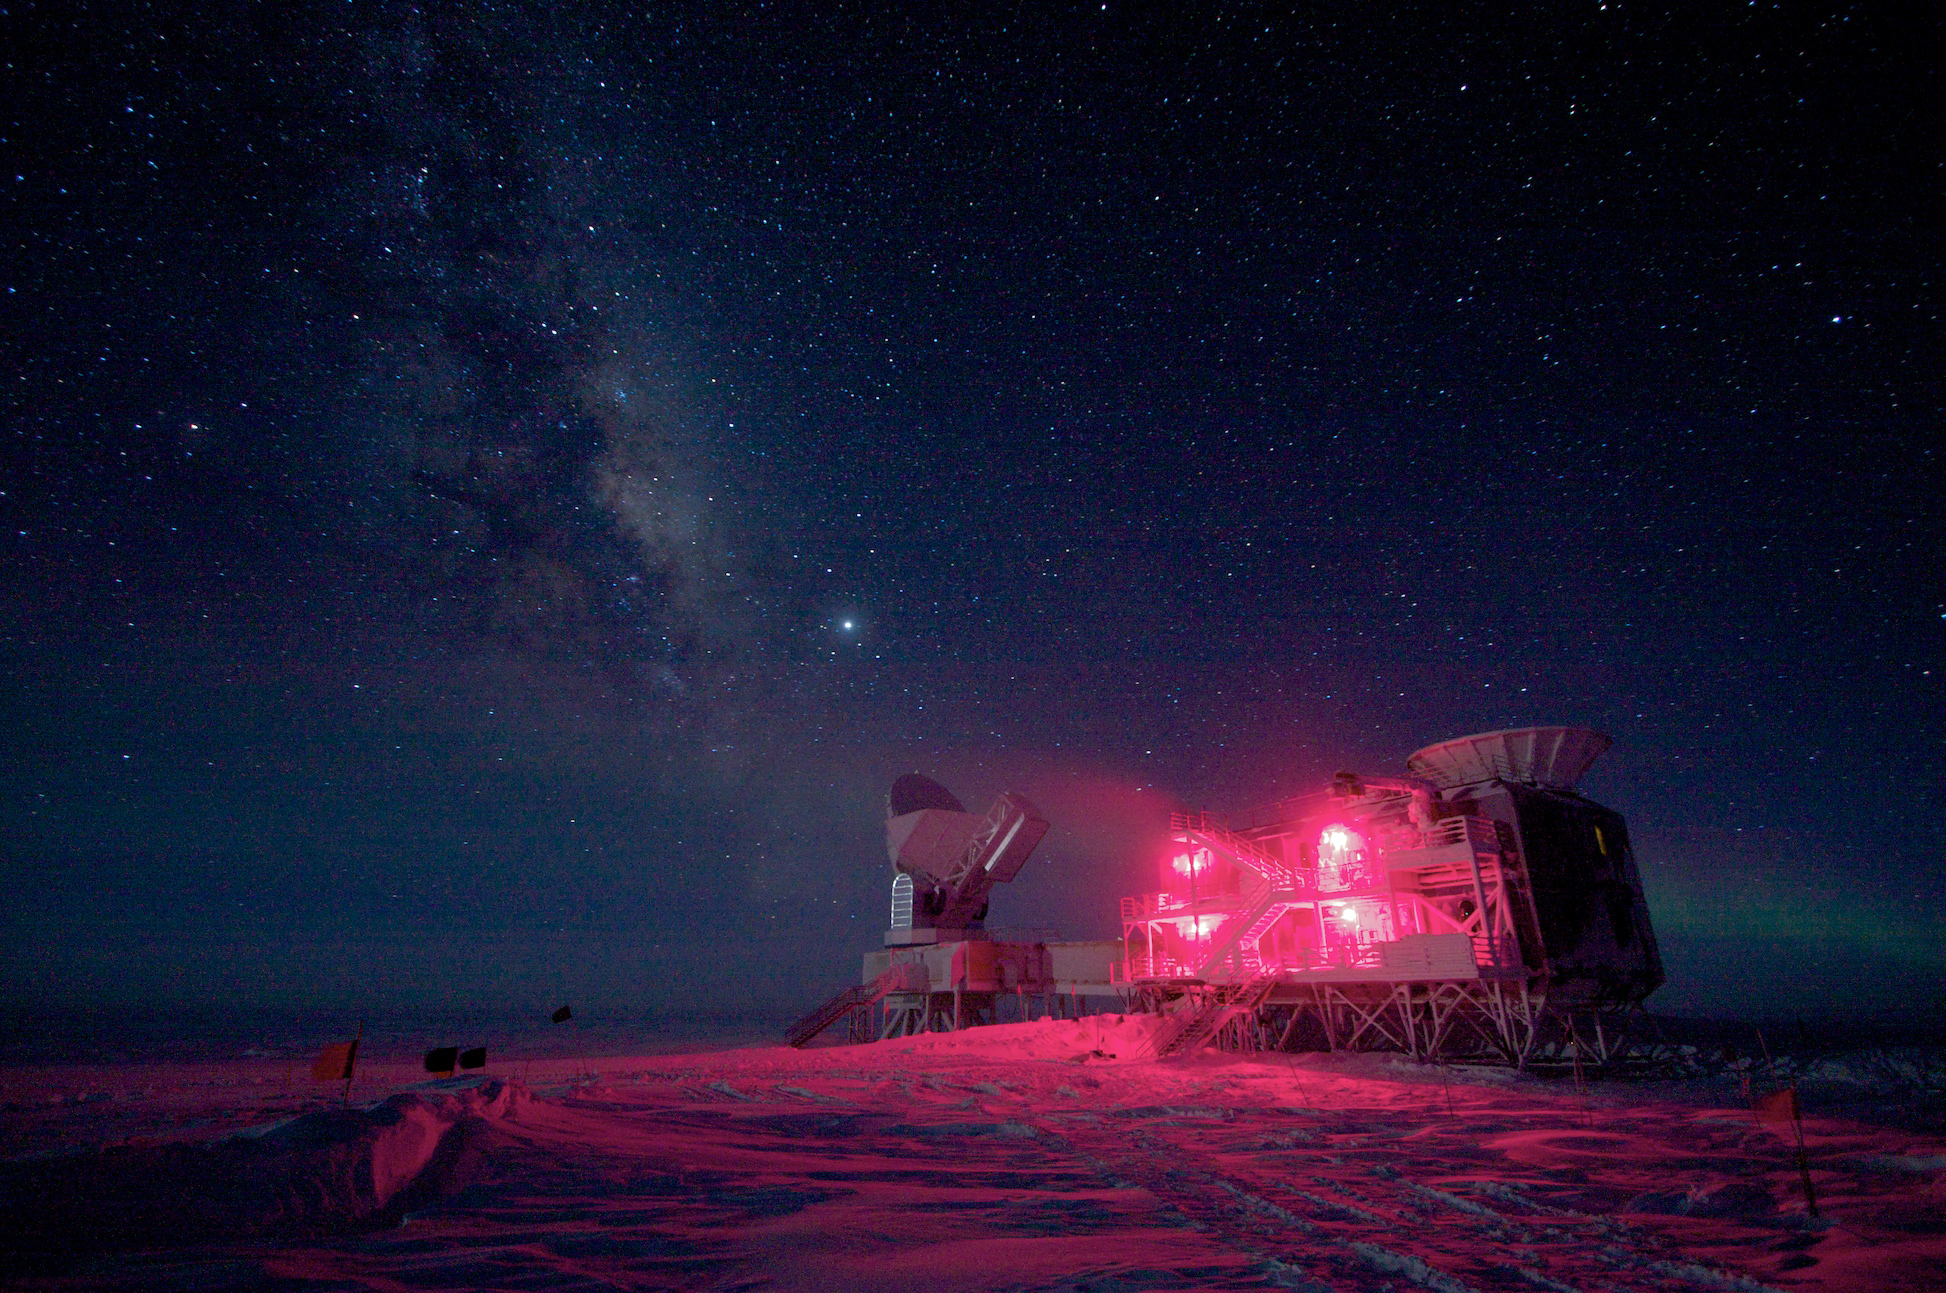 Science building at the South Pole lit with red lights against starry night sky.